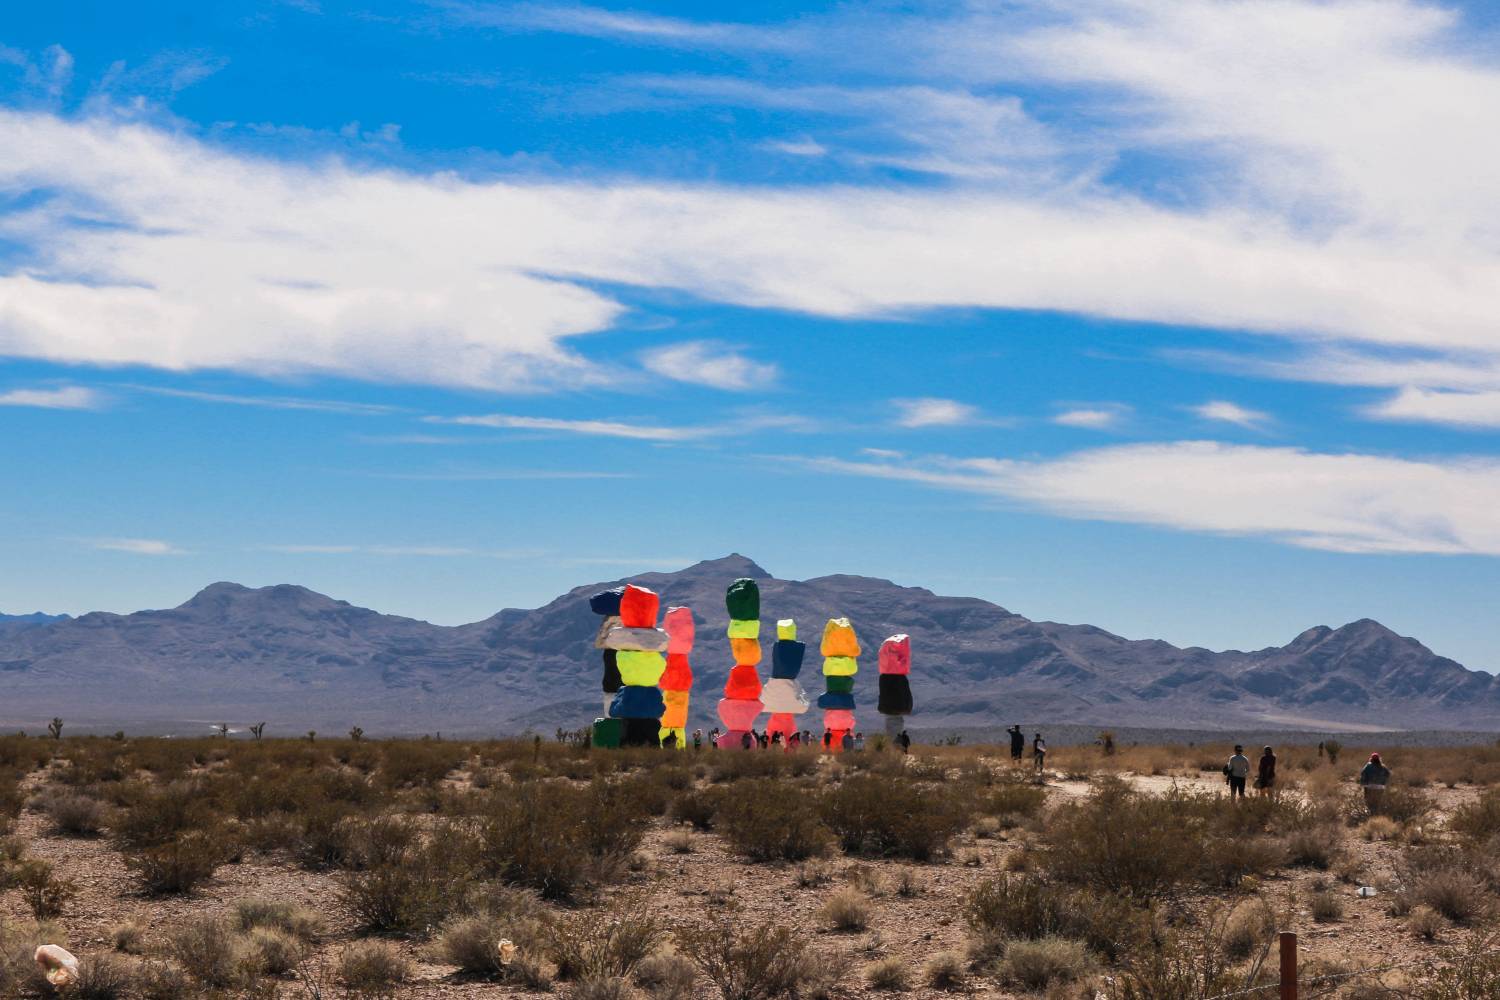 Best Place To Take Photos By Vegas - Seven Magic Mountains